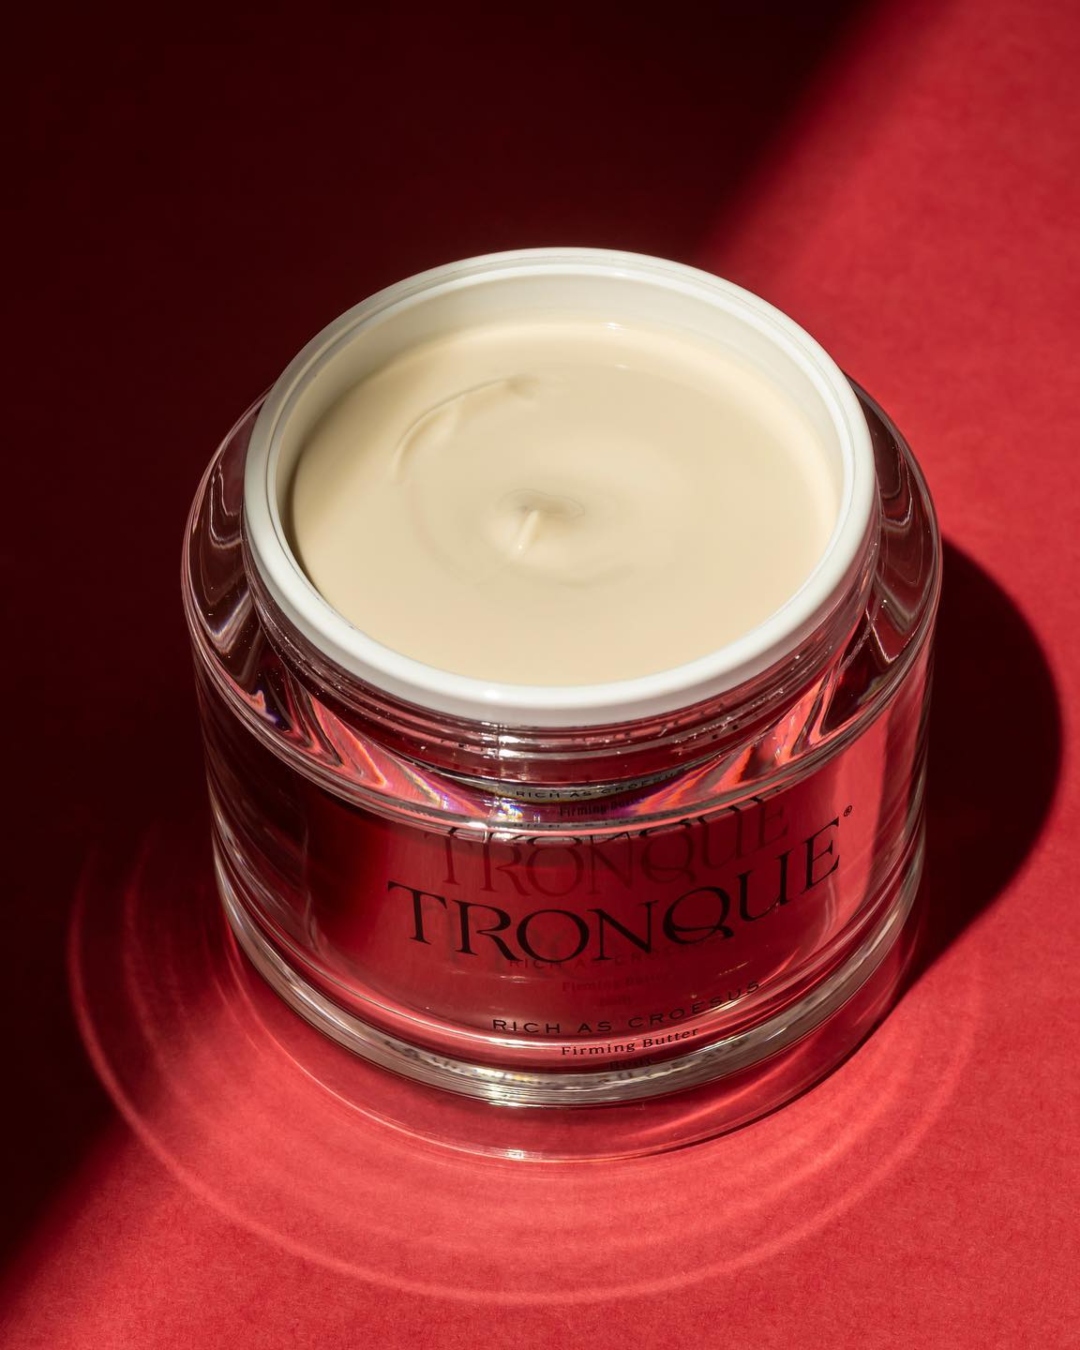 A red glass tub of Tronque firming butter on a sunlit red backdrop.